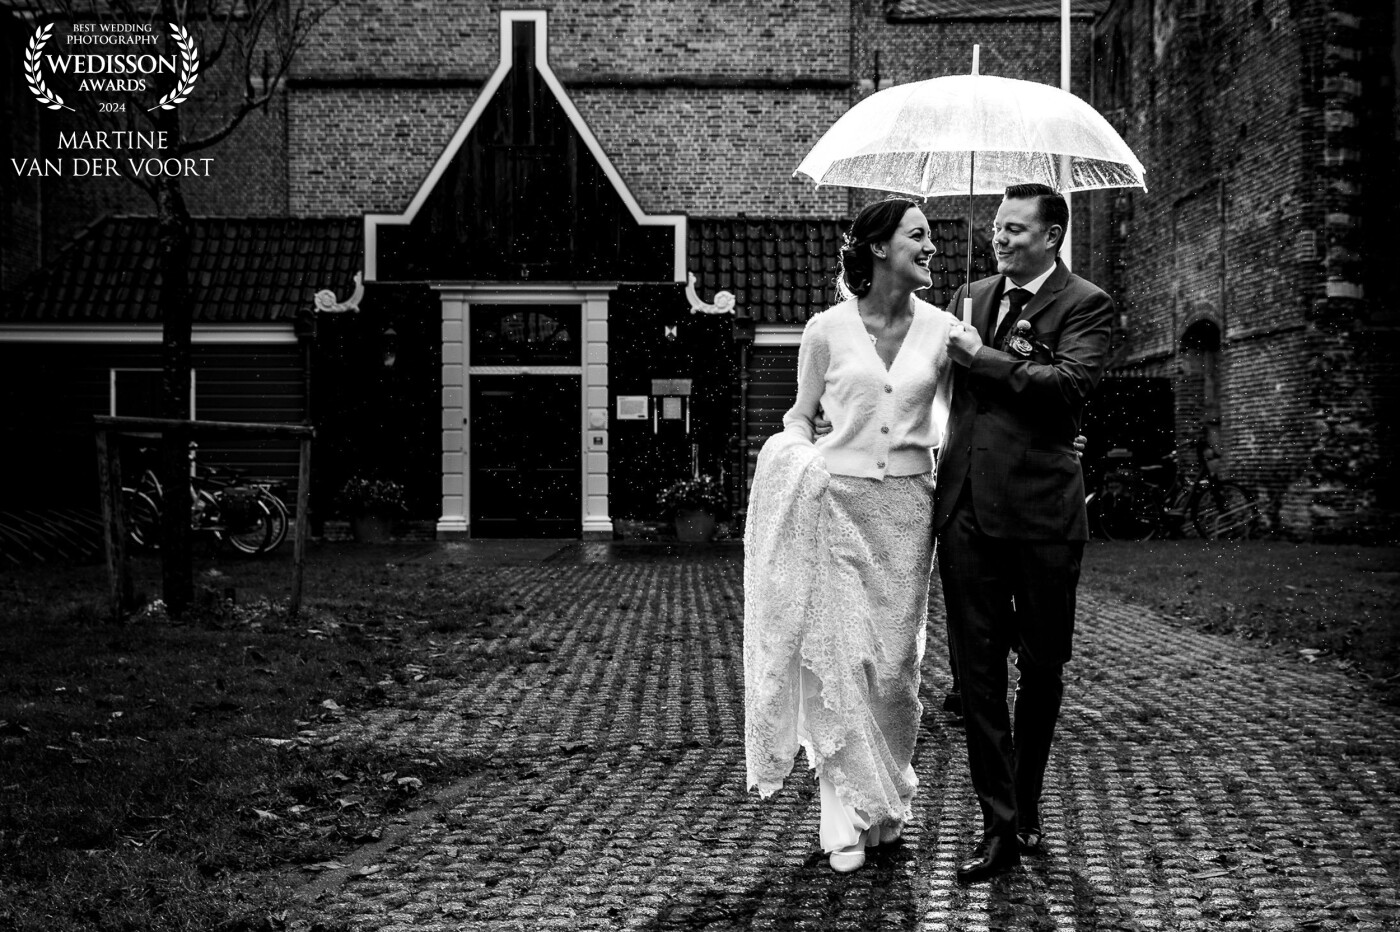 Your wedding day a rainy day? No worries time for some creativity! The wedding couple was cold (this was a winter wedding) but insisted on having outside photos in their favourite little Dutch town. They said, our love and laughter will keep us warm. WOW, what a couple, I love it!<br />
.<br />
Thank you Wedisson Team for awarding this photo with a Wedisson Award. Great to be part of the team.